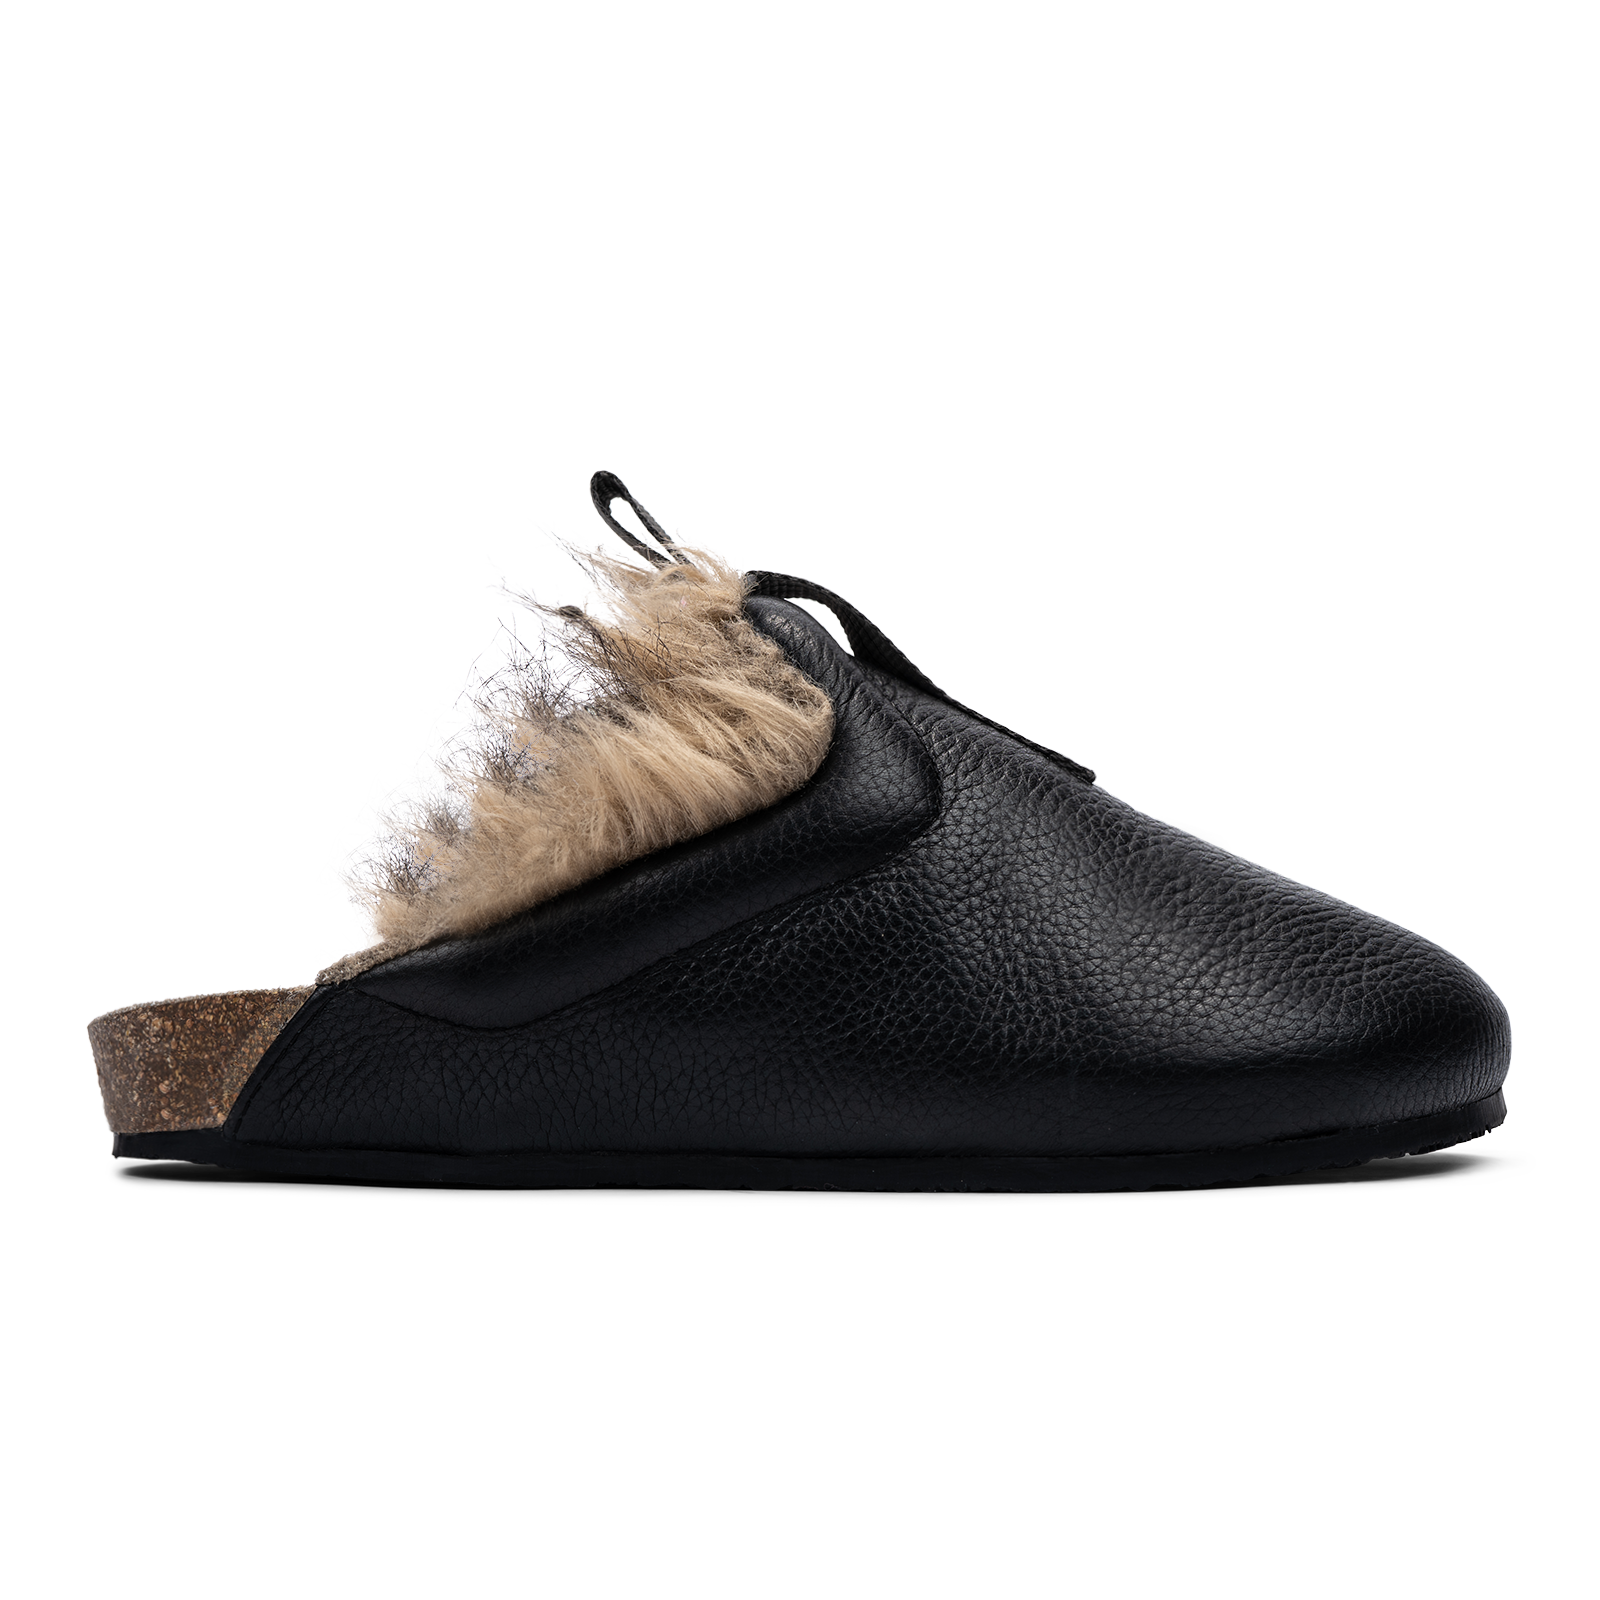 Himalaya profile shot Side view / Bantha Himalya is a Mule with faux fur lining. - Black tumbled leather upper and vibram sheet rubber bottom.